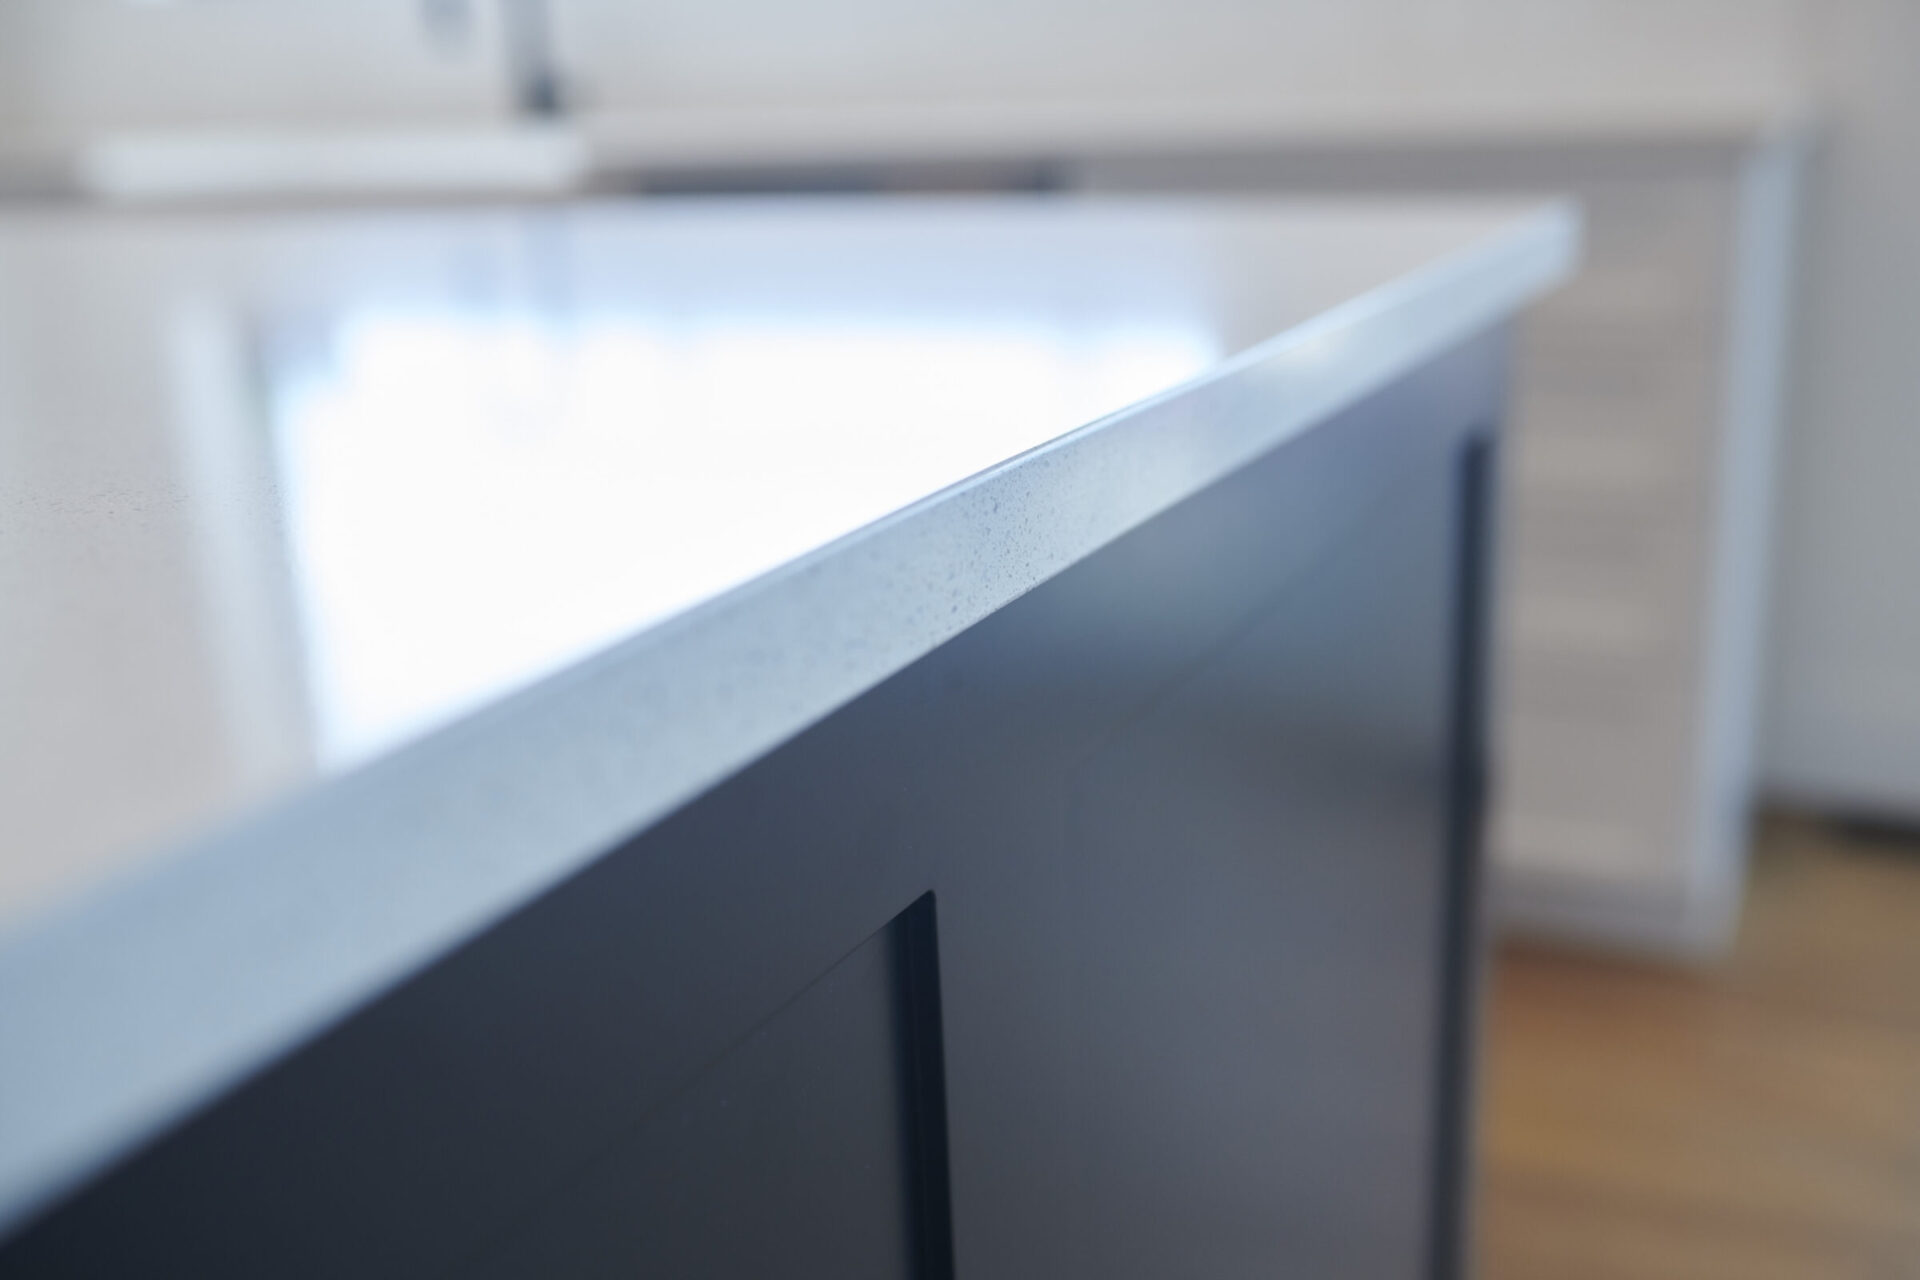 Close-up of a kitchen counter corner showcasing its texture and finish, with blurred cabinetry and flooring in the background, in a minimalist design.